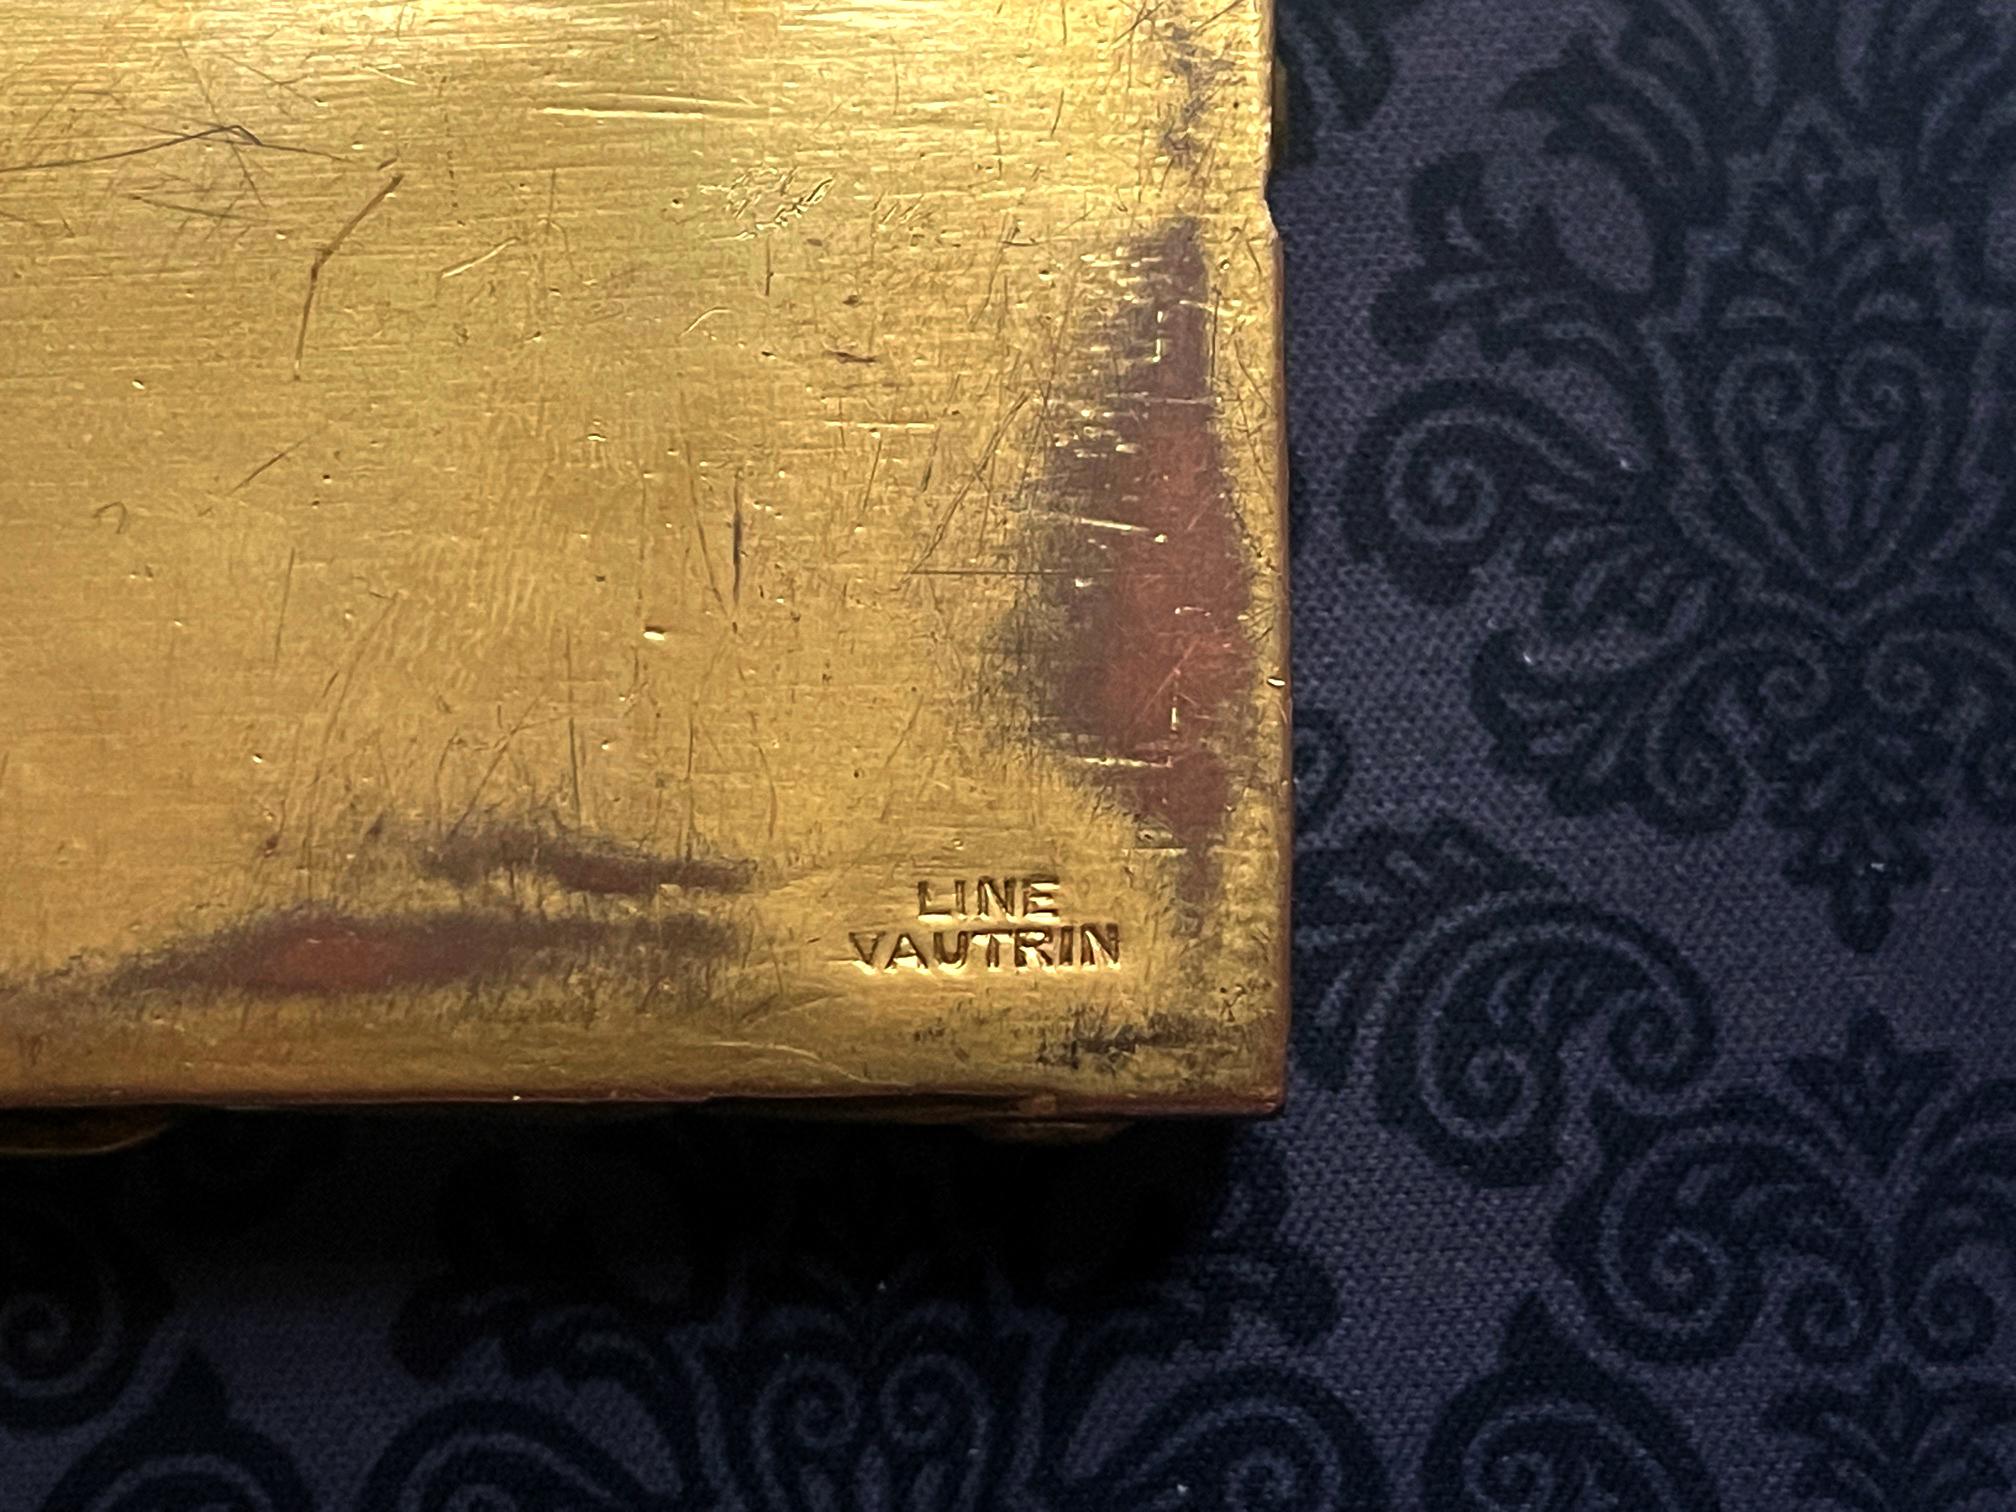 Large French Sculpted Bronze Box by Line Vautrin For Sale 1